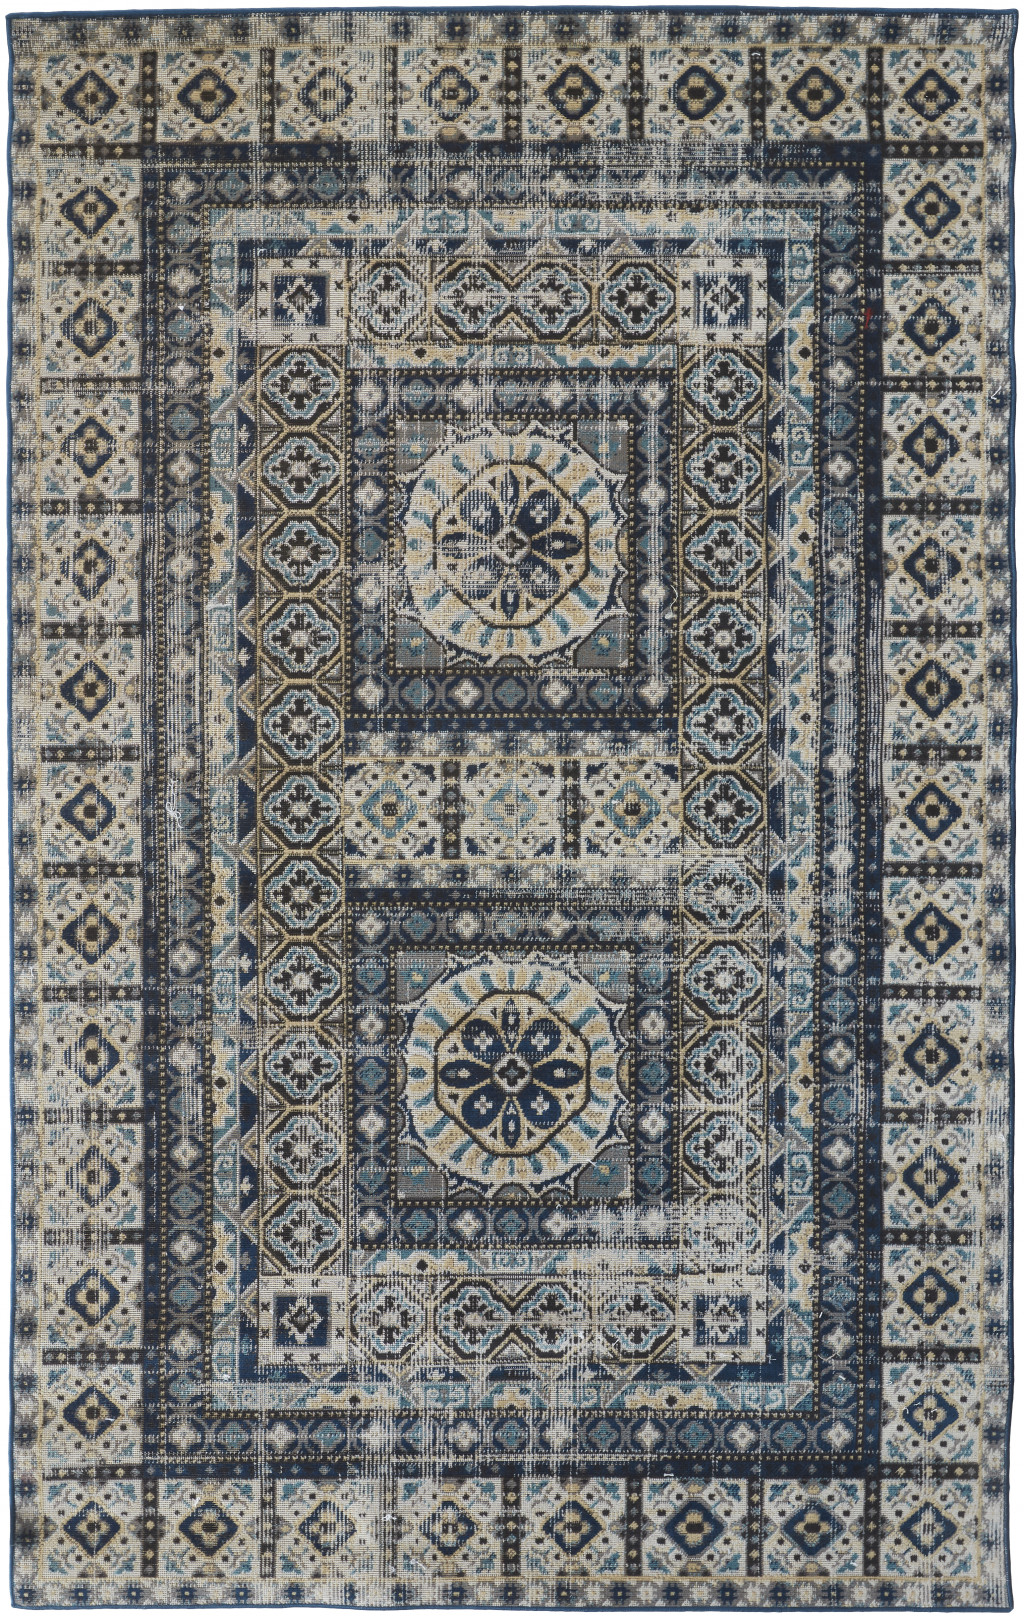 7' X 10' Ivory Tan And Blue Abstract Power Loom Distressed Stain Resistant Area Rug-514627-1